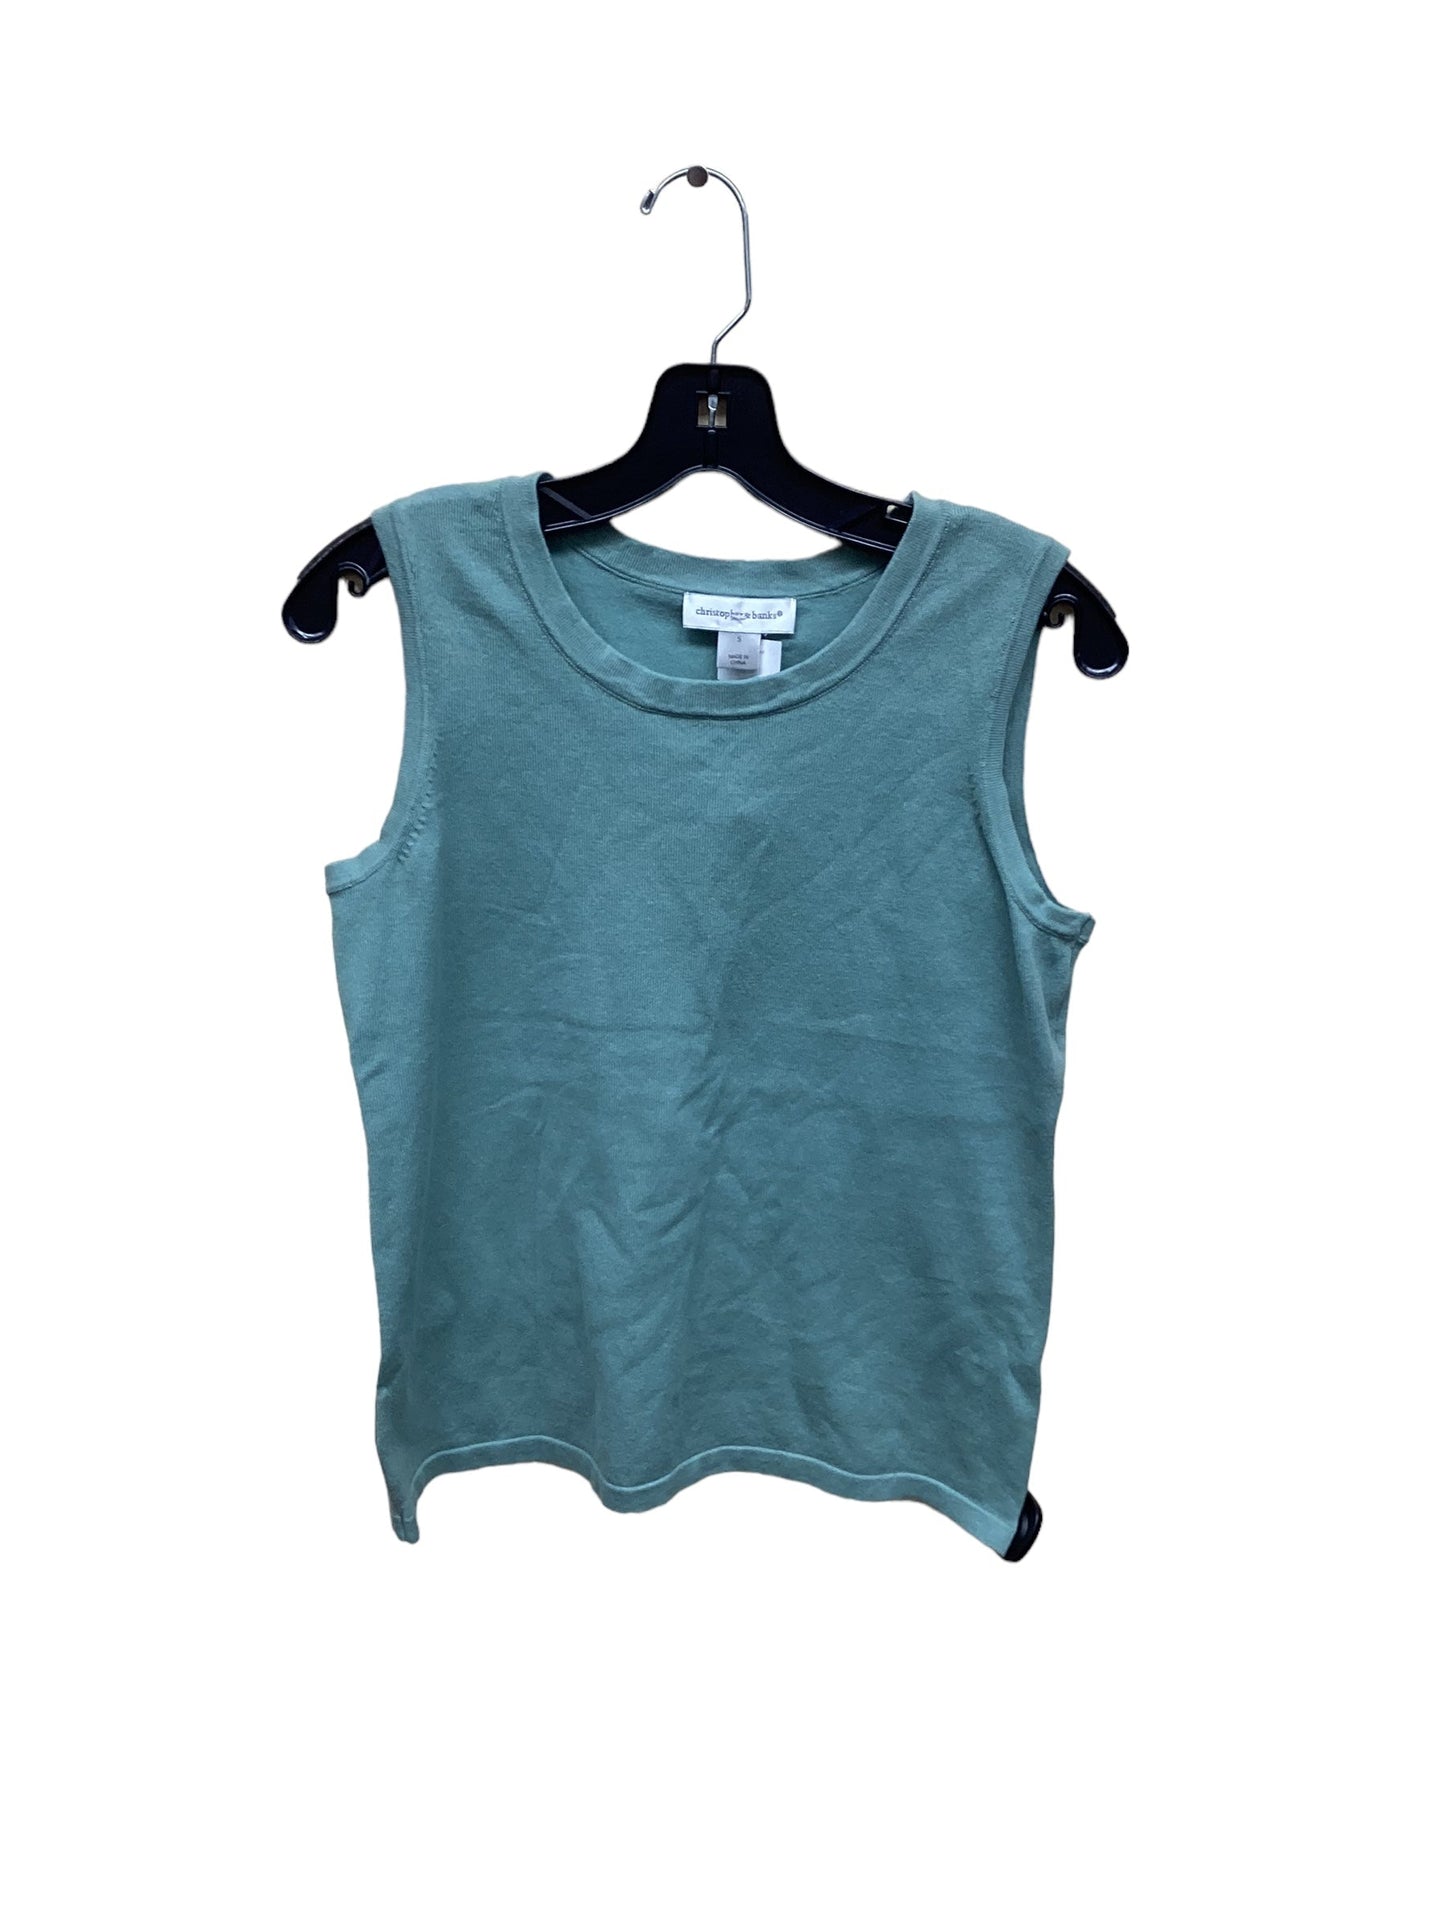 Green Top Sleeveless Christopher And Banks, Size S